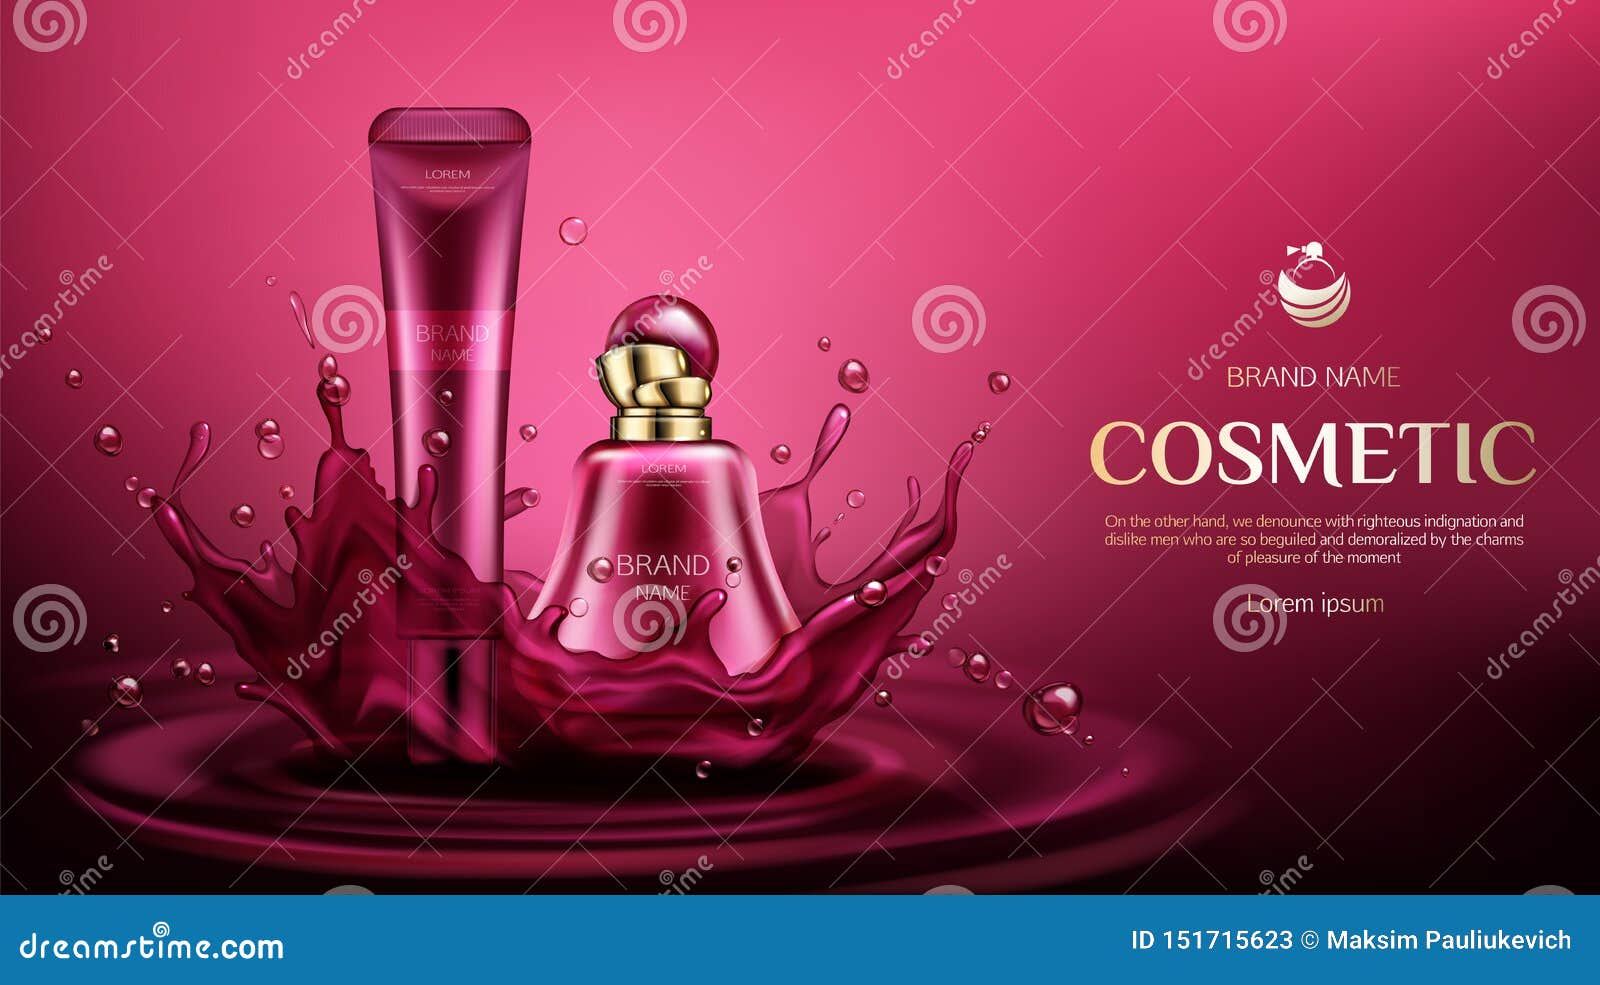 Download Cosmetic Bottles Mock Up, Perfume And Cream Tubes Stock Vector - Illustration of pink, luxury ...